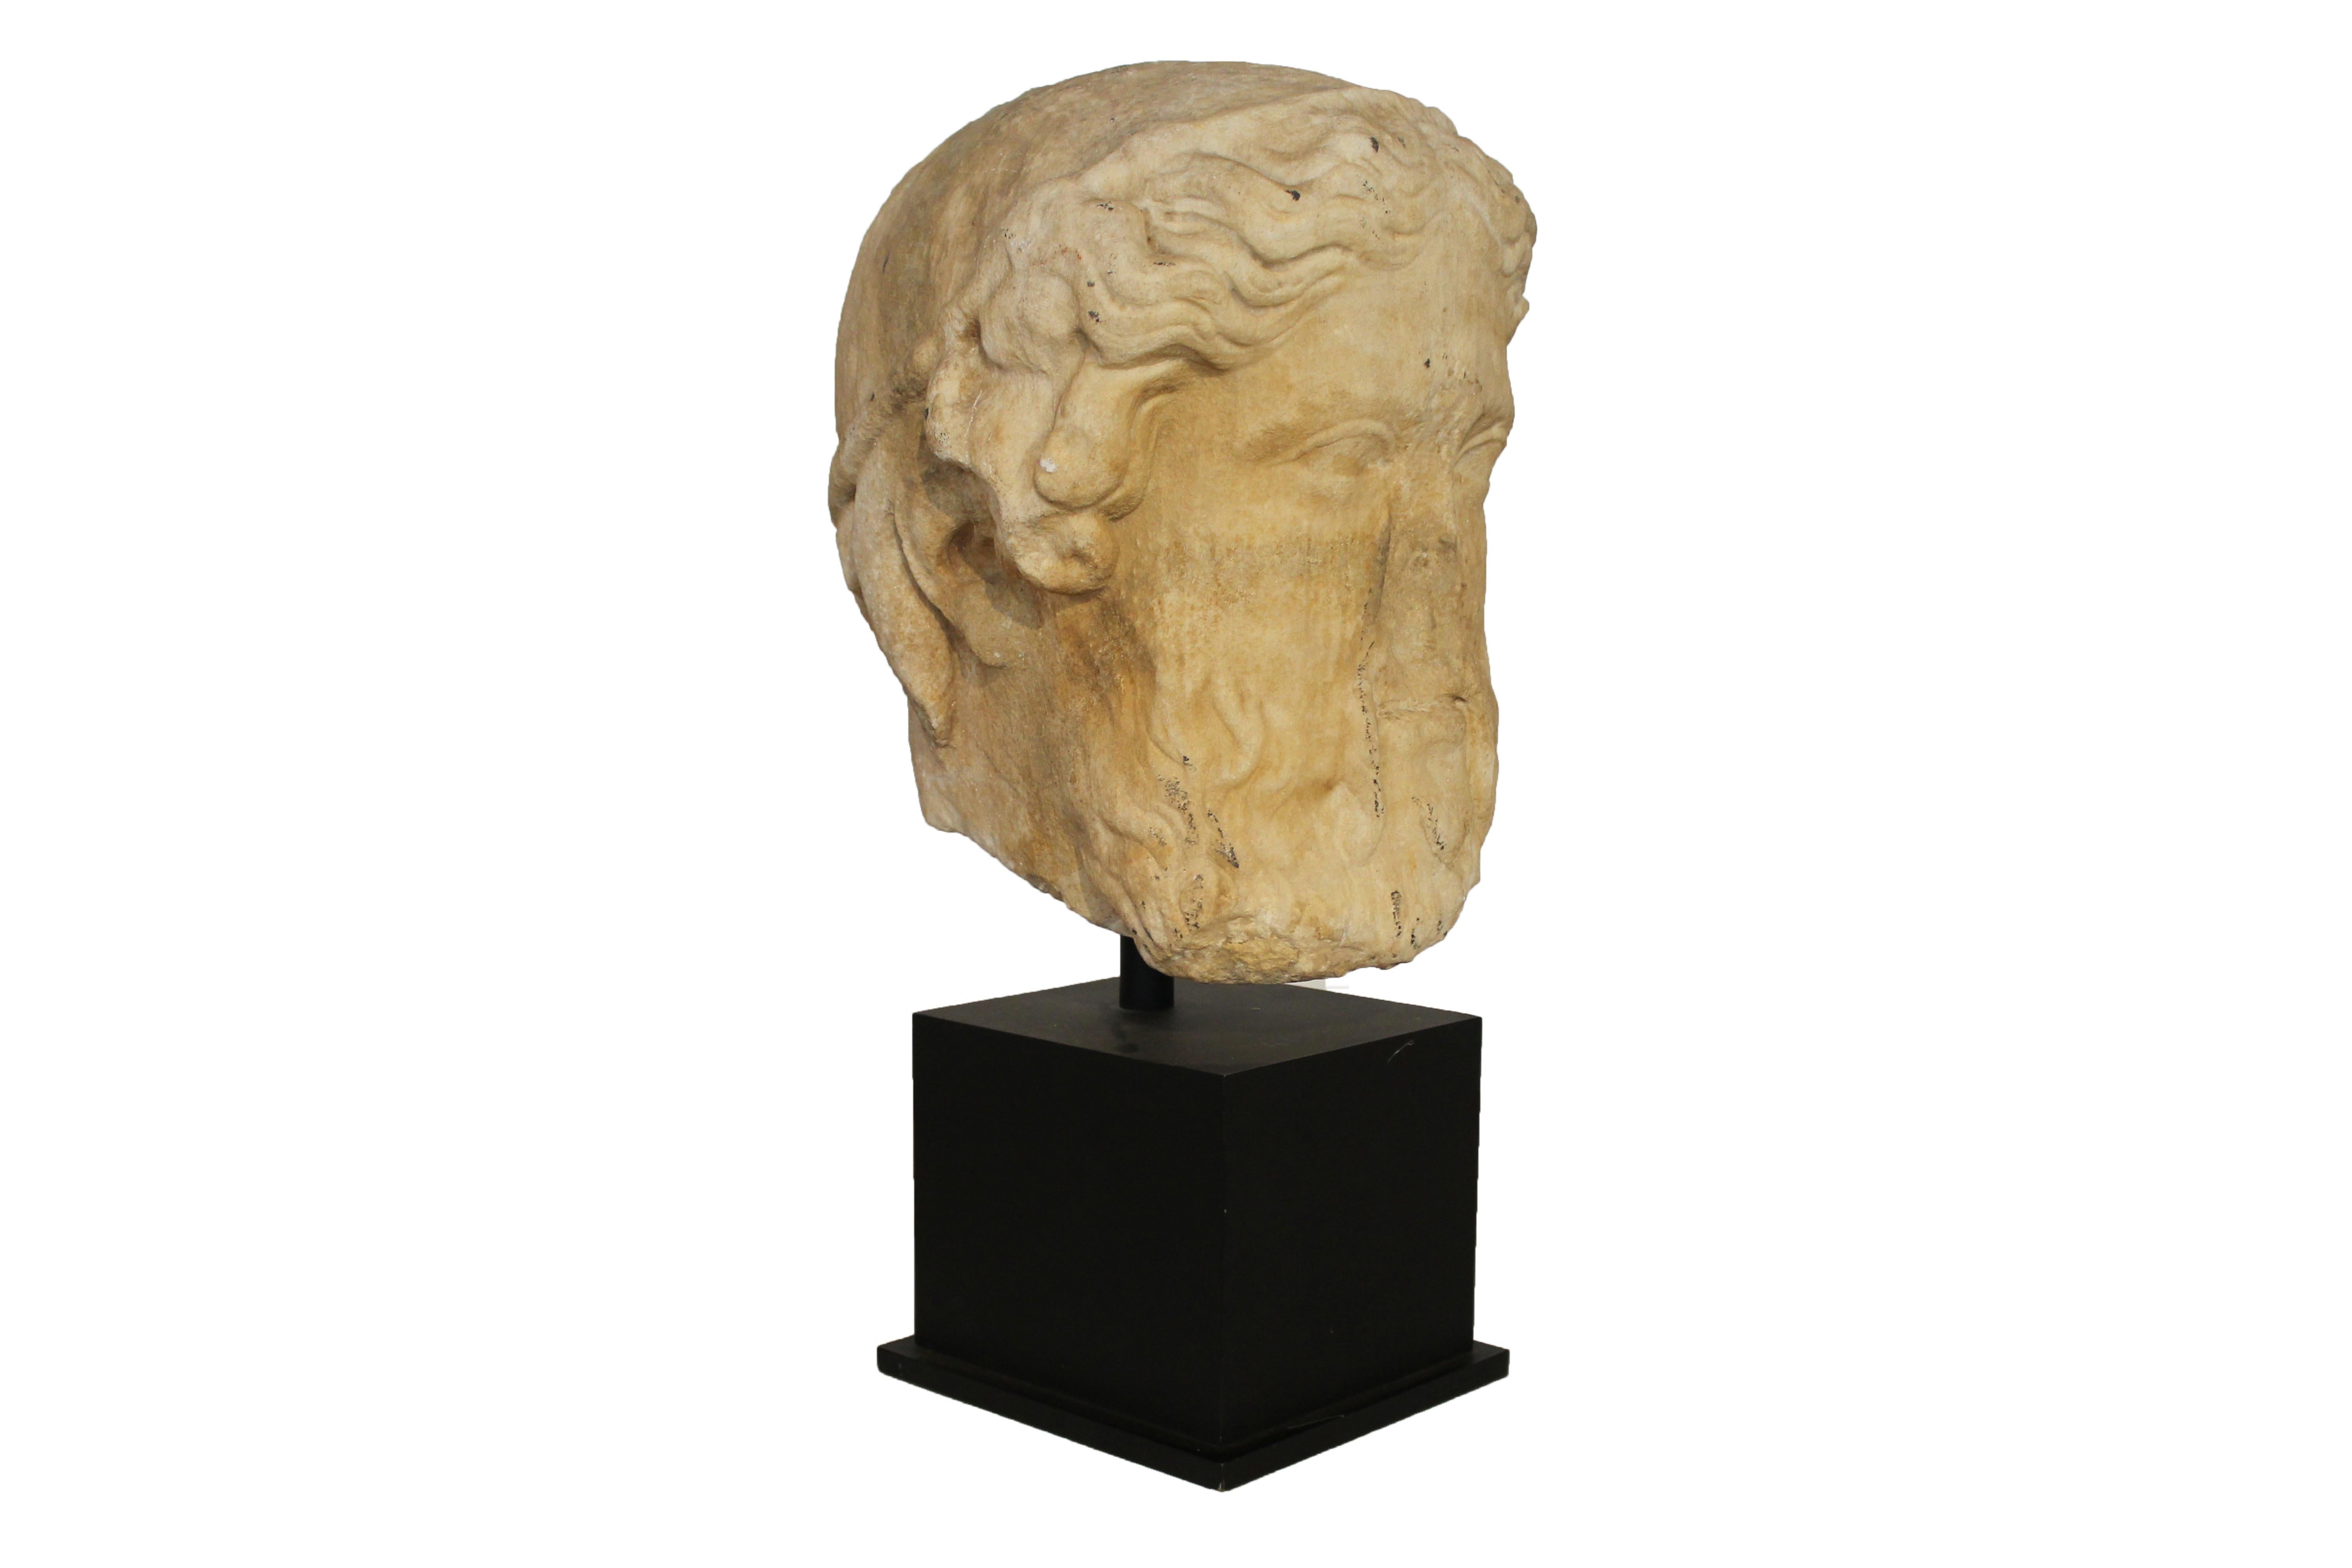 Hermes head sculpture.
Greek Bust representing Hermes.
Hermes is an Olympian deity, the God of Speed, in ancient Greek religion and mythology.
Sculpted white marble with a metal base.
Provenance: Galeria F. Cervera (Arqueologia - Ancient